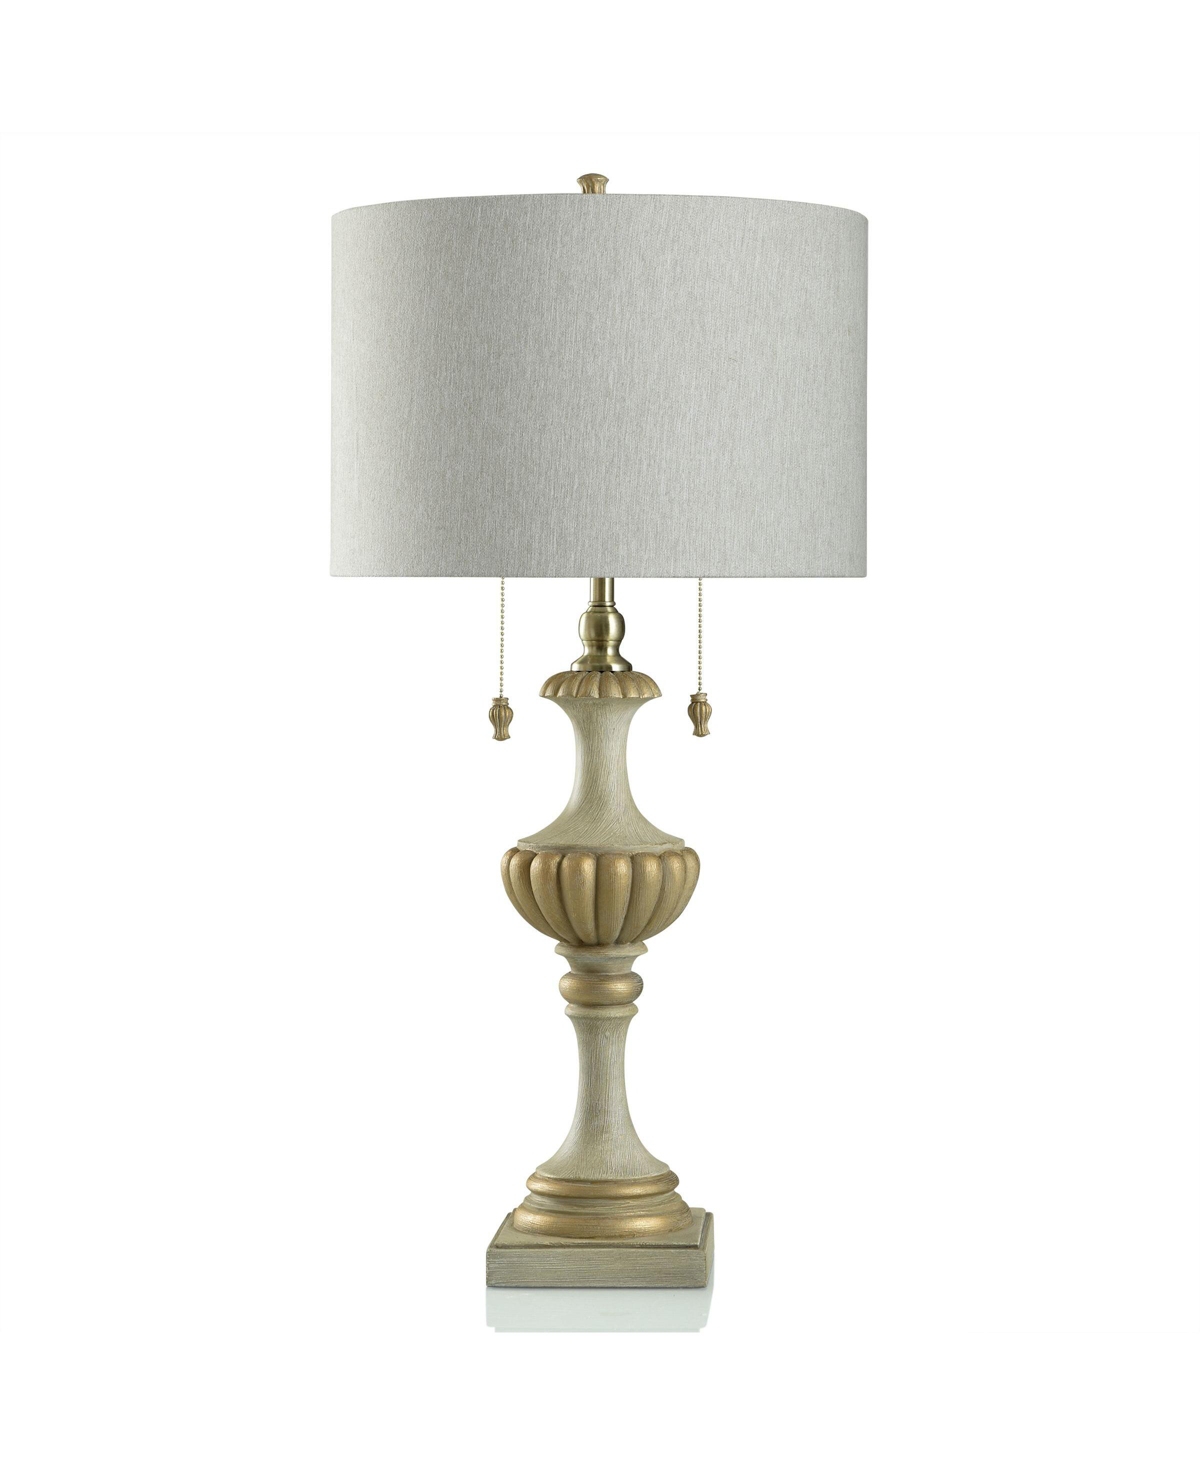 Stylecraft Home Collection 33.5" Chrysta Creme Traditional Double Pull Chain Table Lamp In Washed Cream,gold